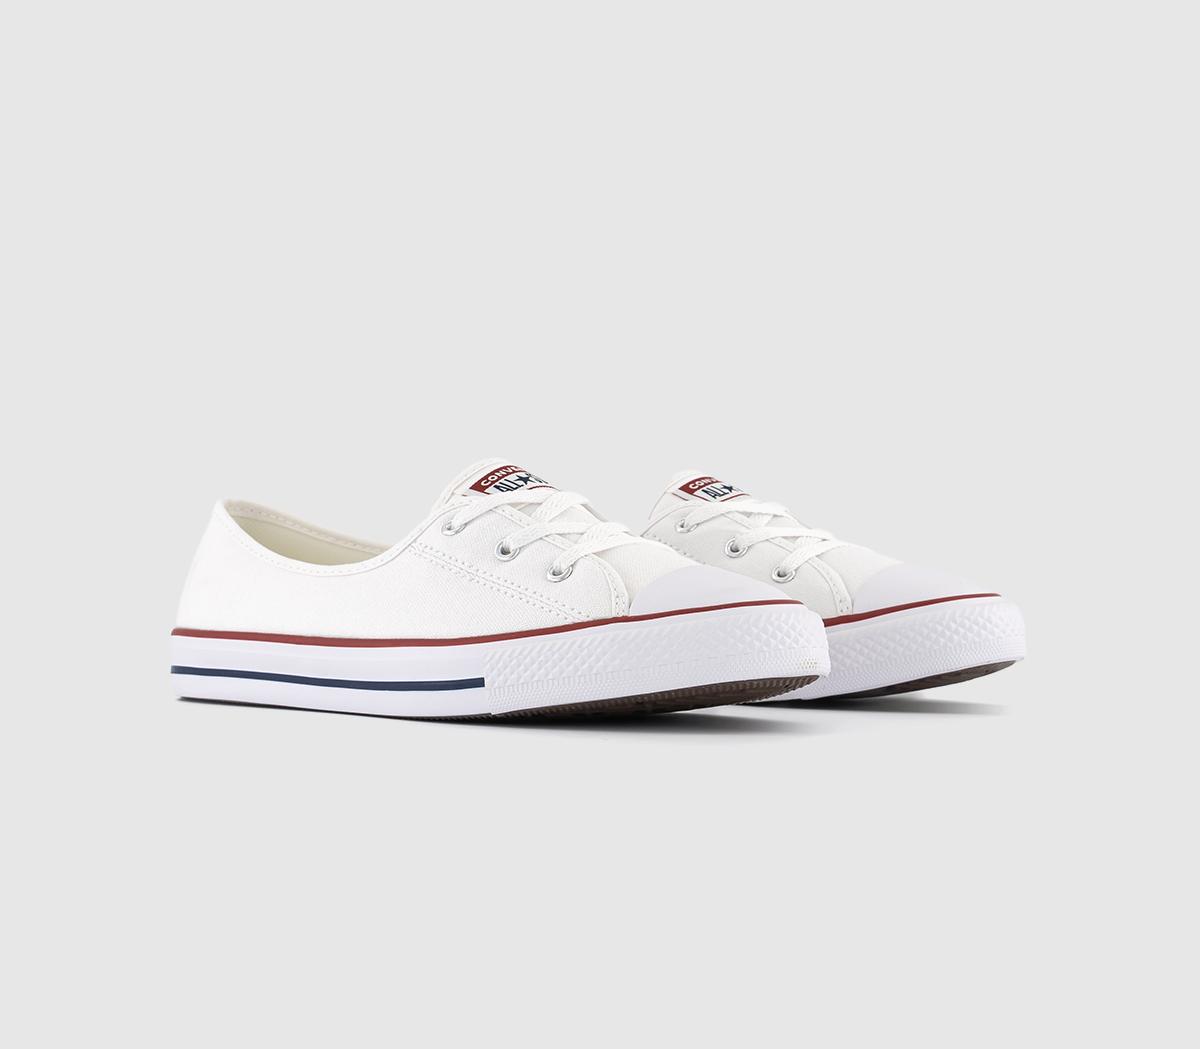 Converse Kids Ctas Ballet Lace White, Red And Blue Canvas Sneakers, 3.5